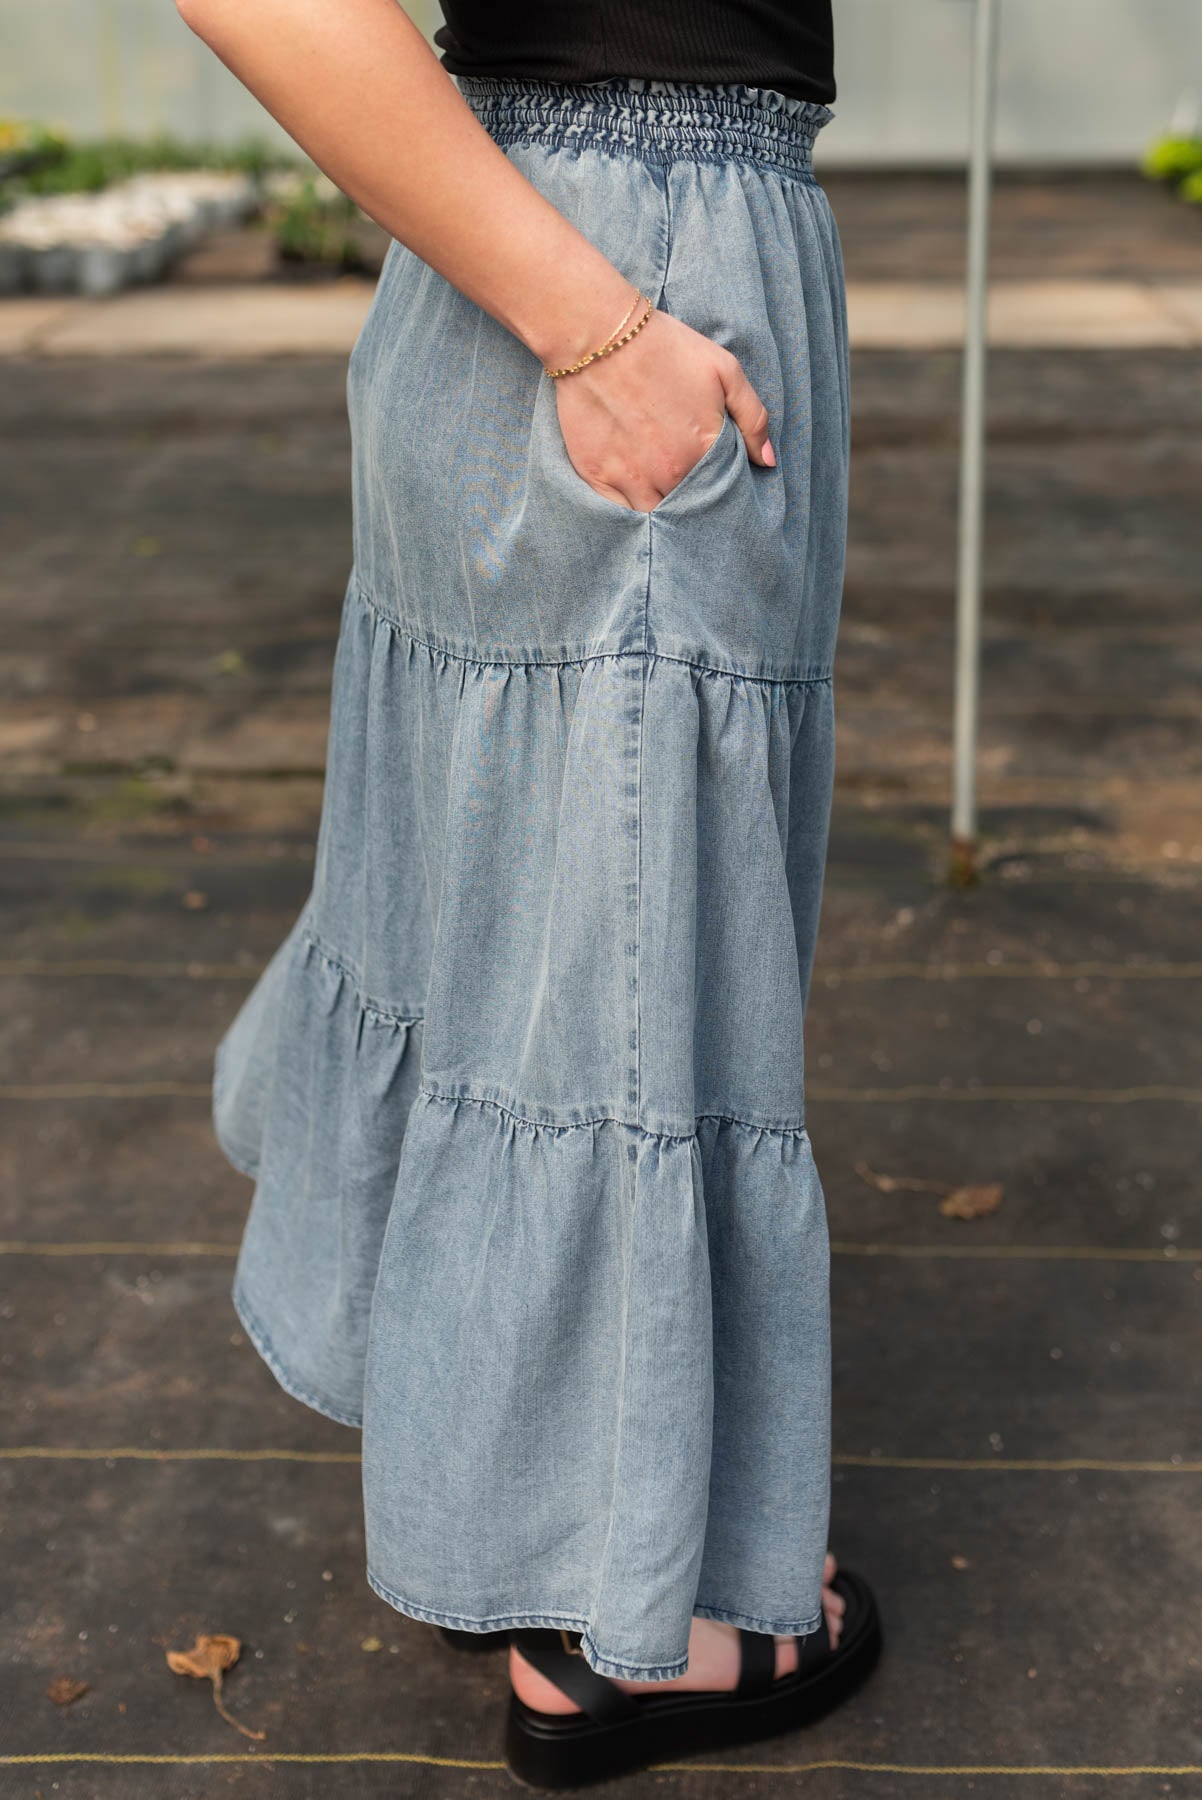 Side view of the denim blue tiered skirt